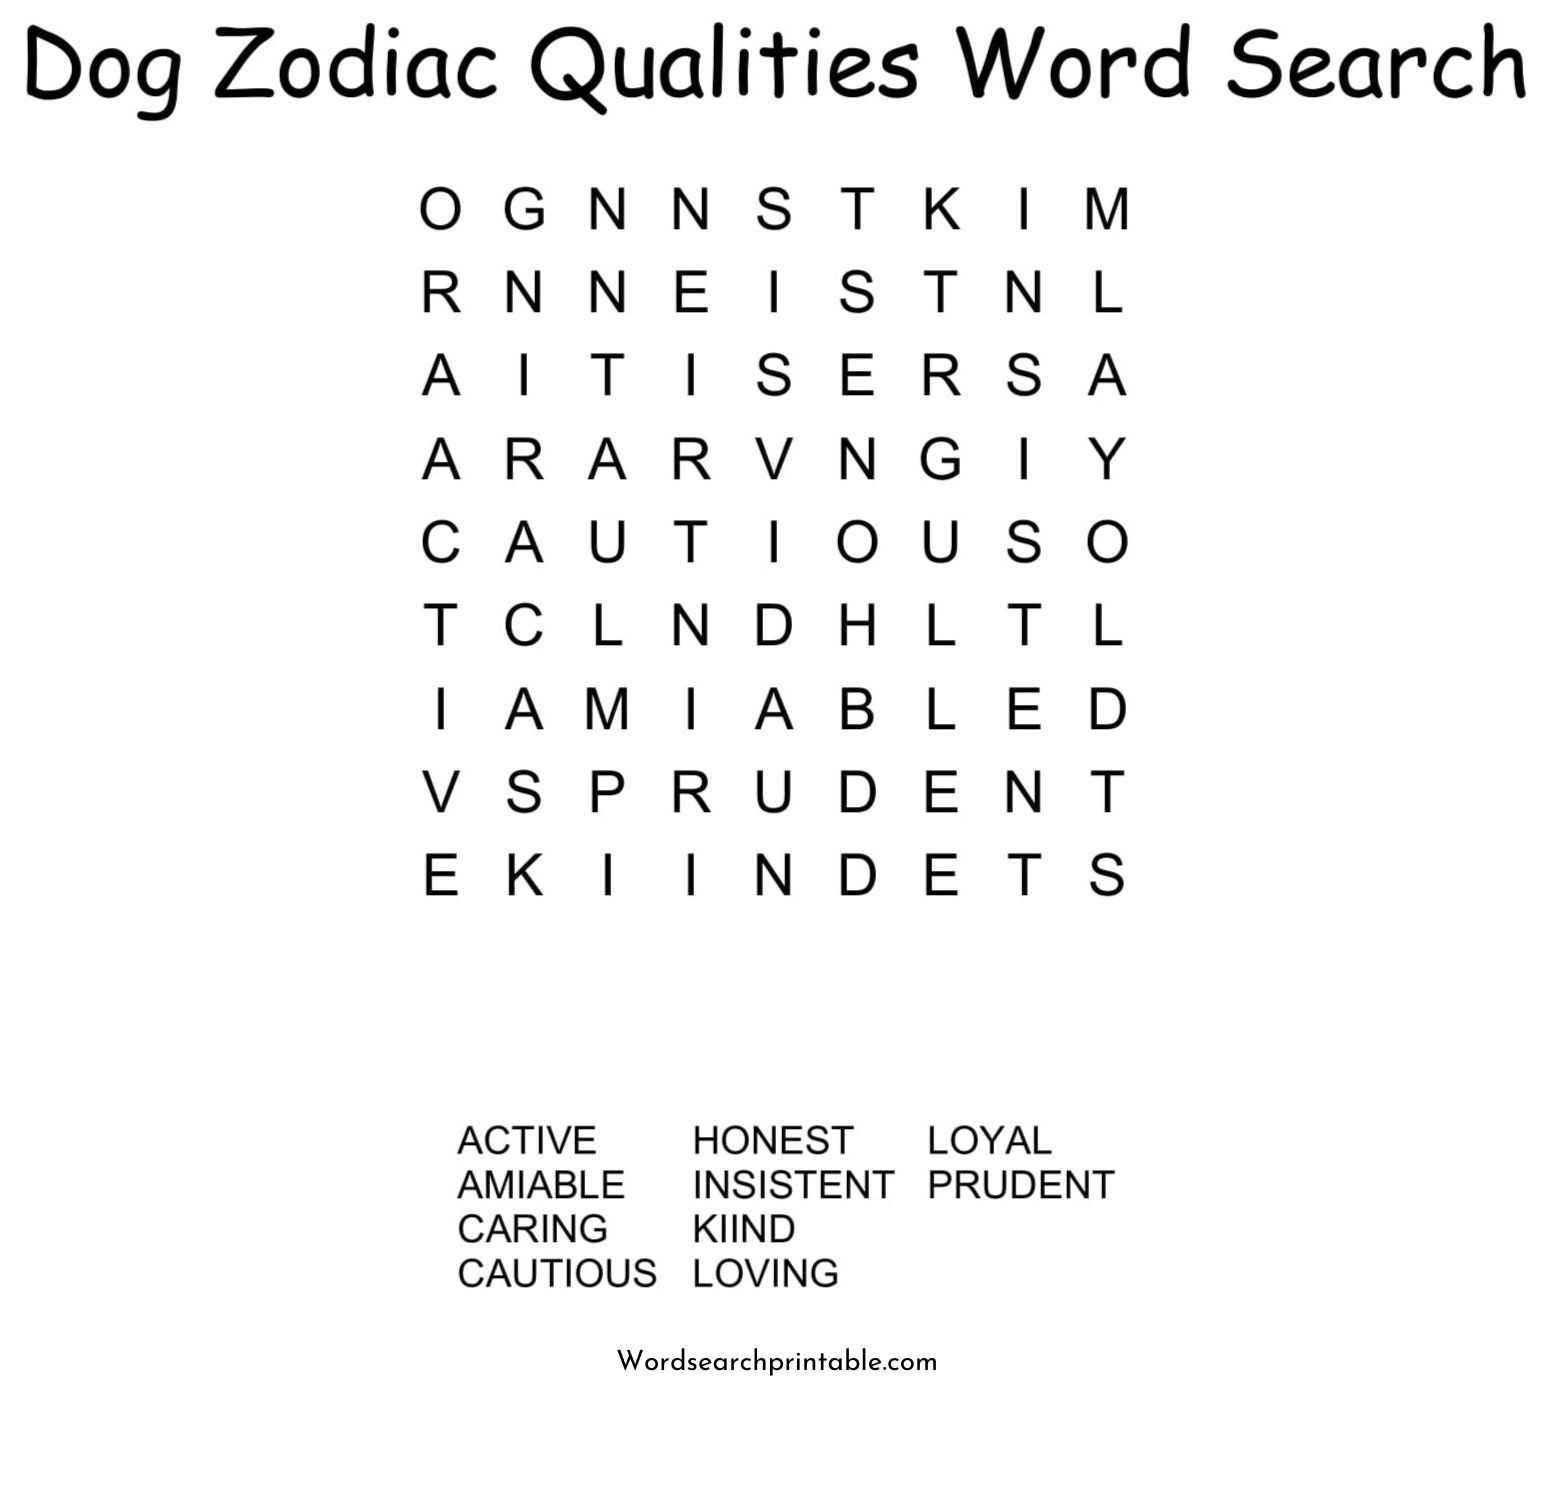 dog zodiac qualities word search puzzle solution